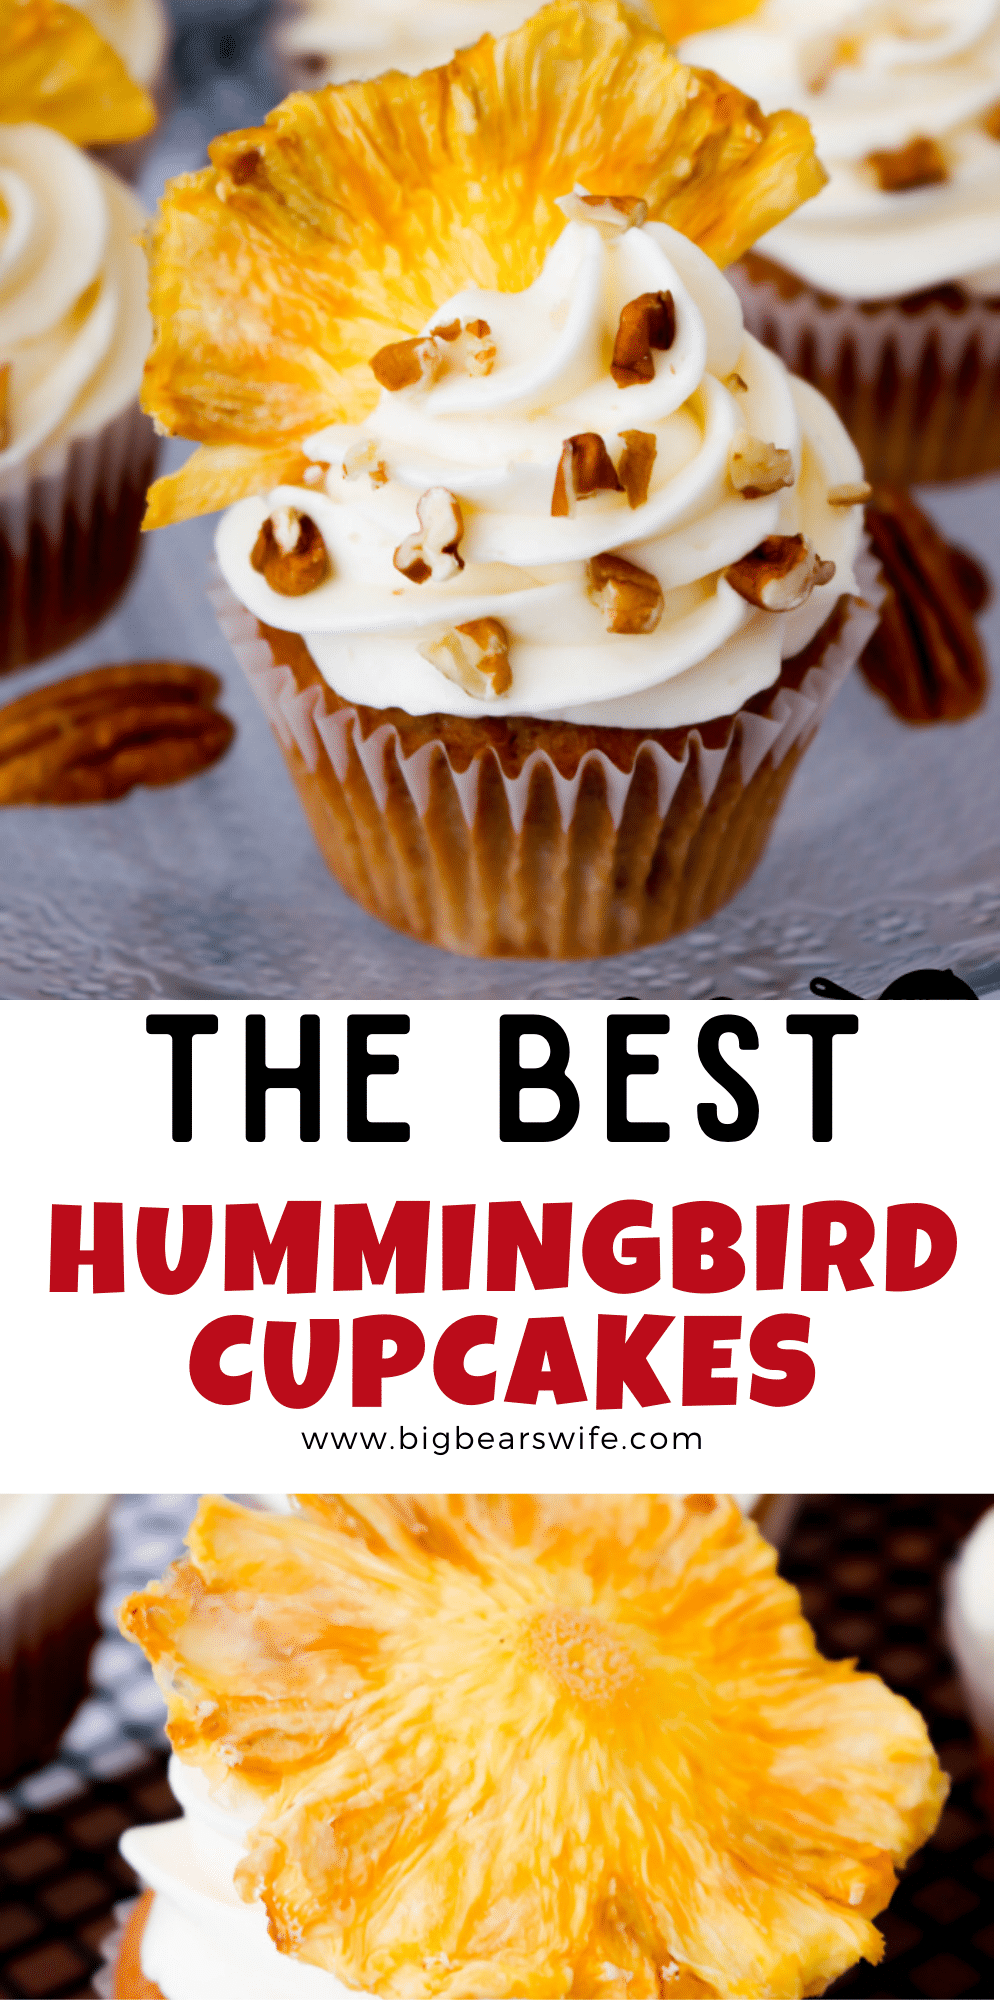 All the classic flavors of a hummingbird cake, no fork or plate required! These Hummingbird Cupcakes are made with a classic southern hummingbird cake batter and frosted with a homemade cream cheese frosting. They’re also topped with dried pineapple flowers and chopped pecans. Perfect for wedding showers, church dinners or summer brunches.

 via @bigbearswife